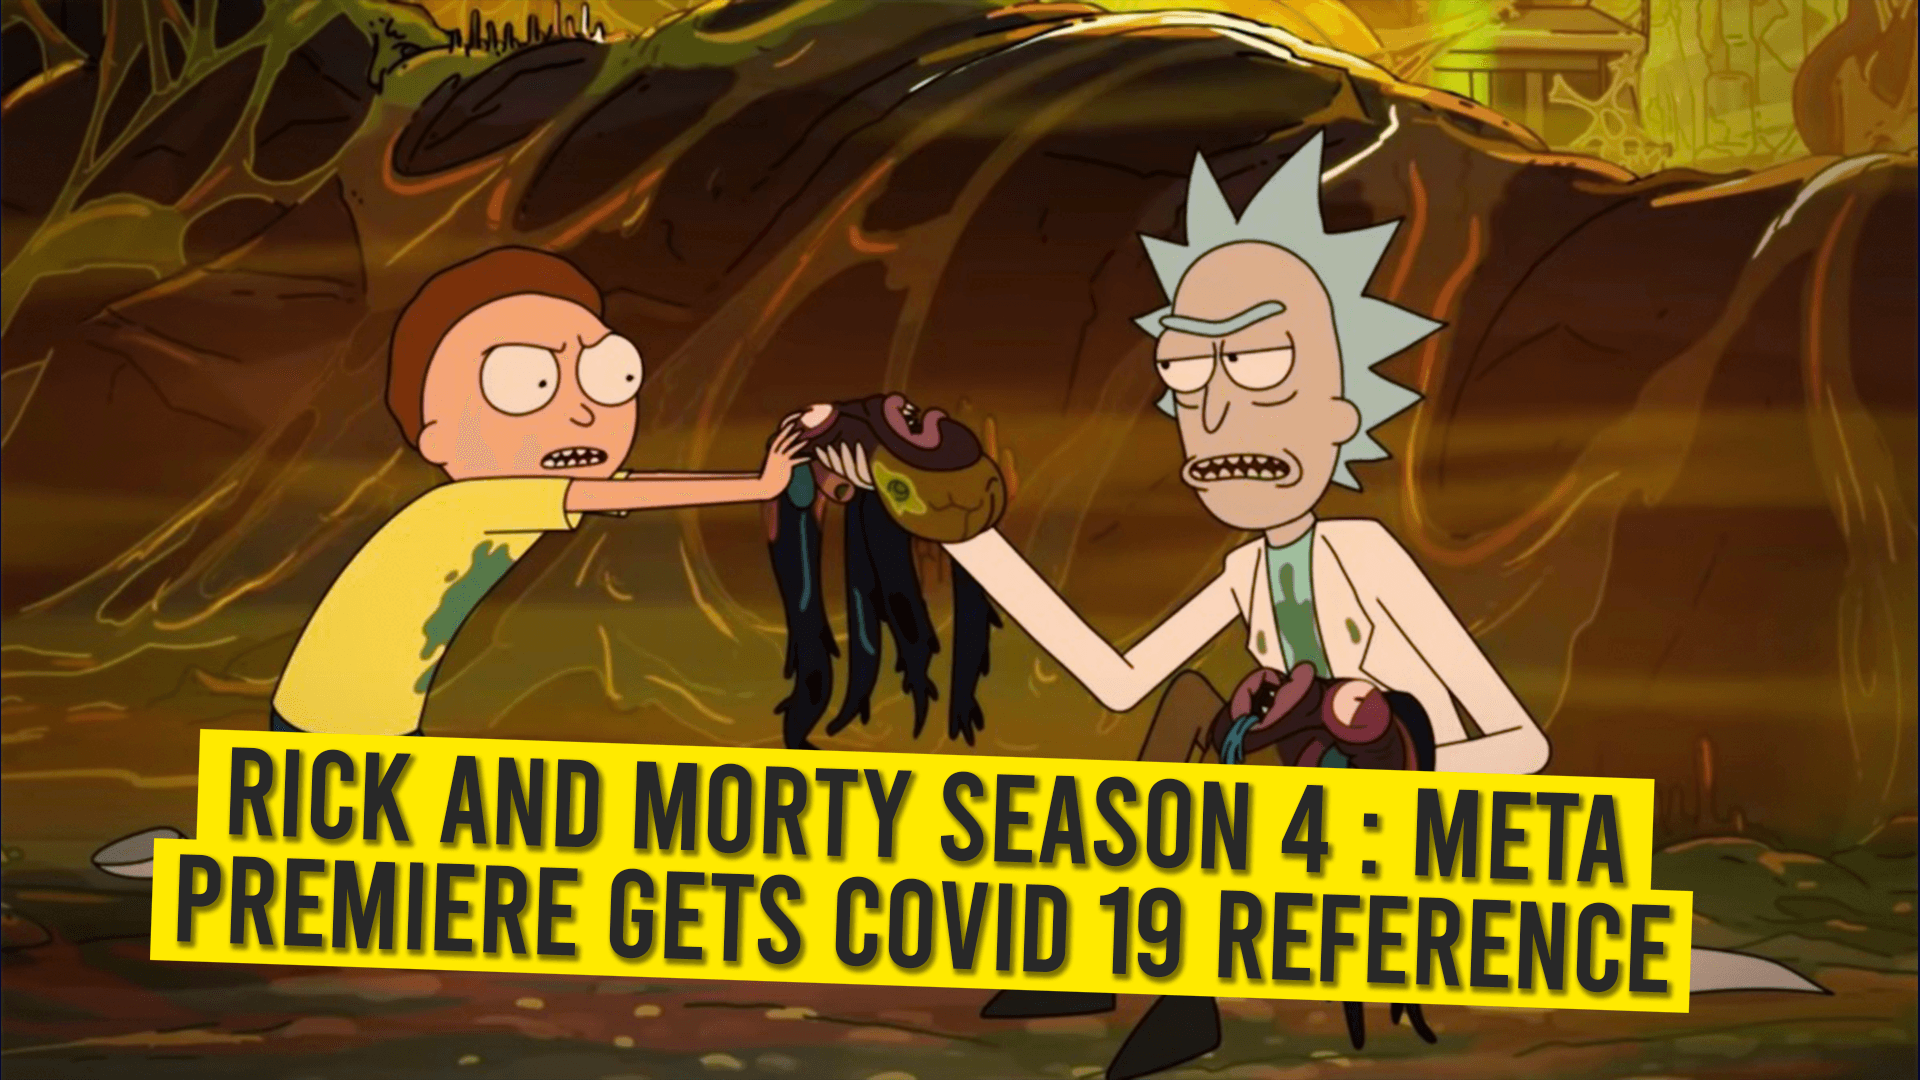 Rick And Morty Season 4 : Meta Premiere Gets Covid 19 Reference